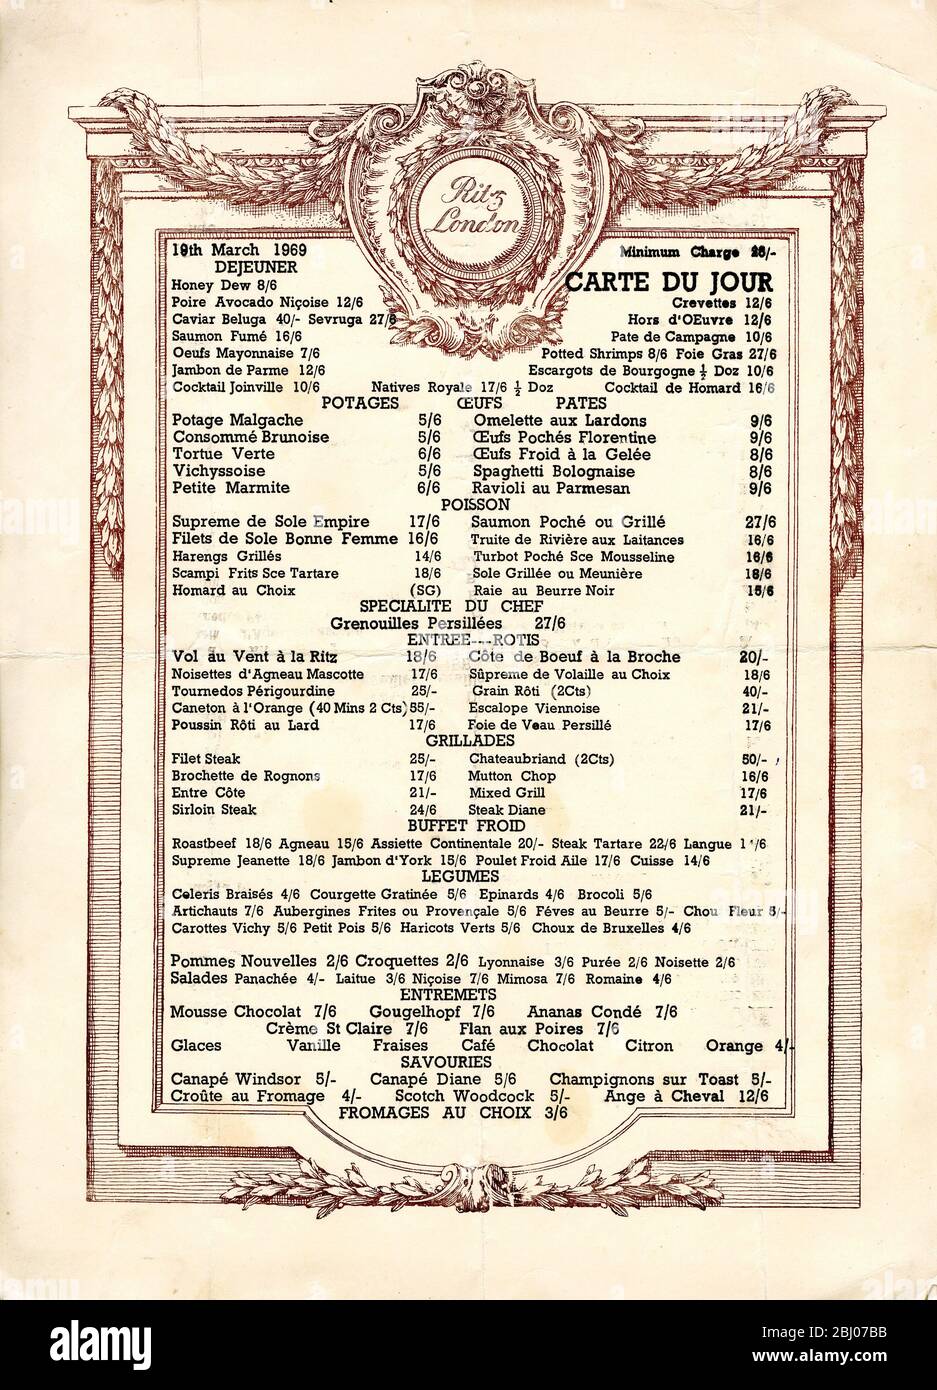 Carrier Collection of Menus - The Ritz - 19 Marzo 1969 - Piccadilly, Londra, Inghilterra Foto Stock